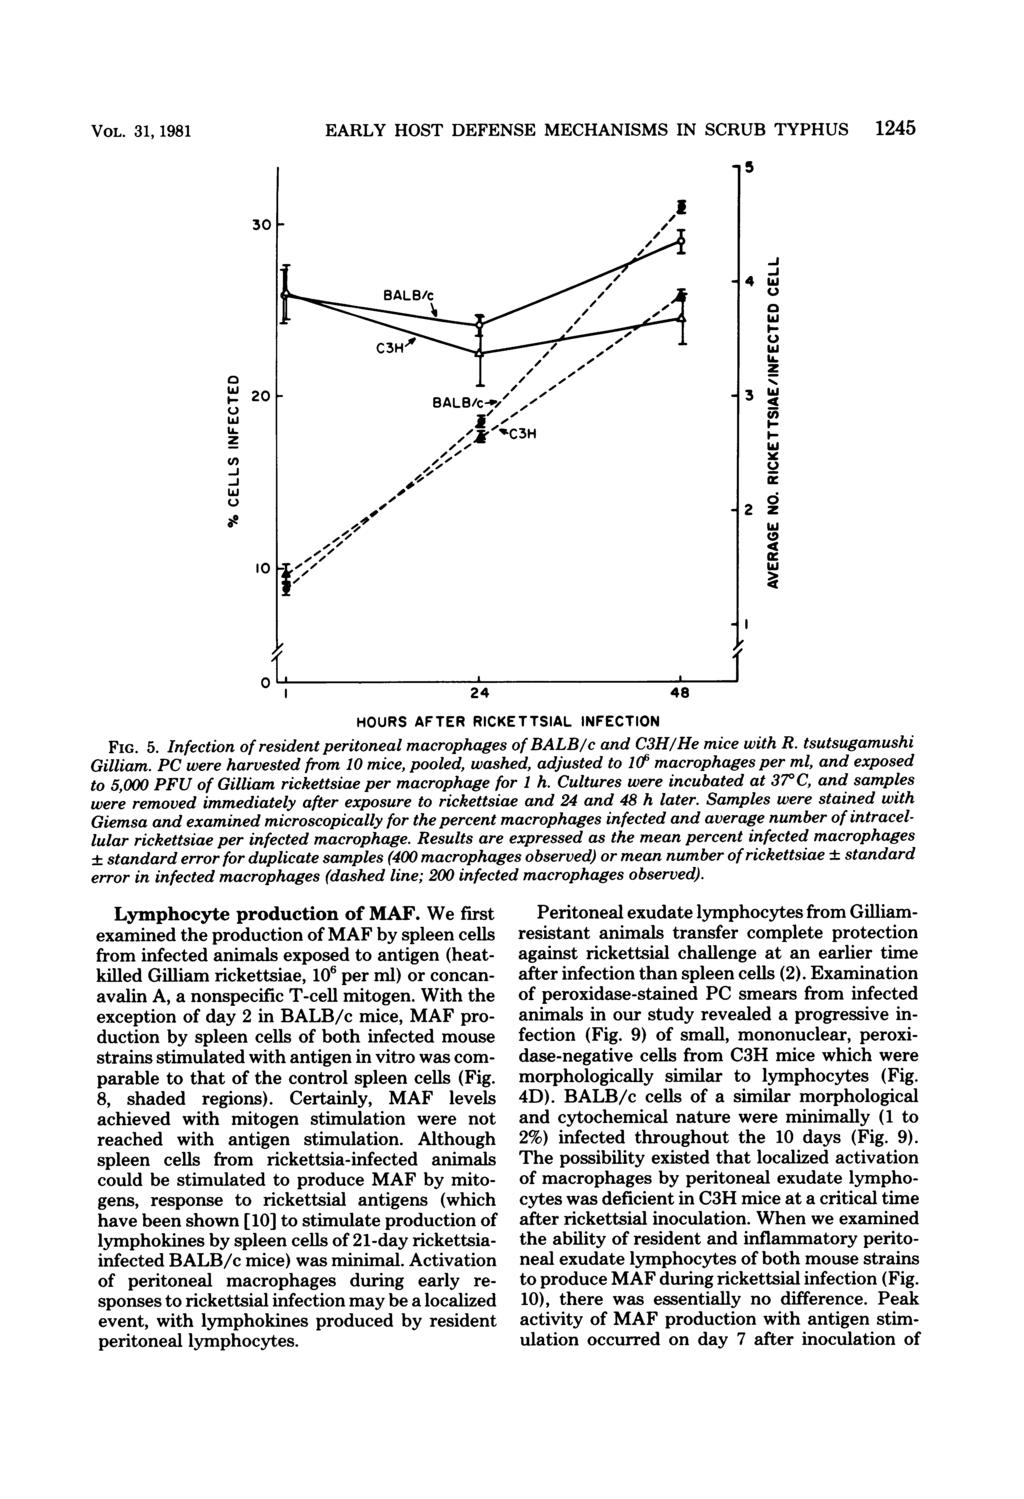 VOL. 31, 1981 EARLY HOST DEFENSE MECHANISMS IN SCRUB TYPHUS 1245 5 3 w I.. 2 U ż -J -J w I, -J -i 4w w U. _z 3 o- < en wft y 2z w 49 w 4 LL. HOURS AFTER RICKETTSIAL INFECTION FIG. 5. Infection of resident peritoneal macrophages of BALB/c and C3H/He mice with R.